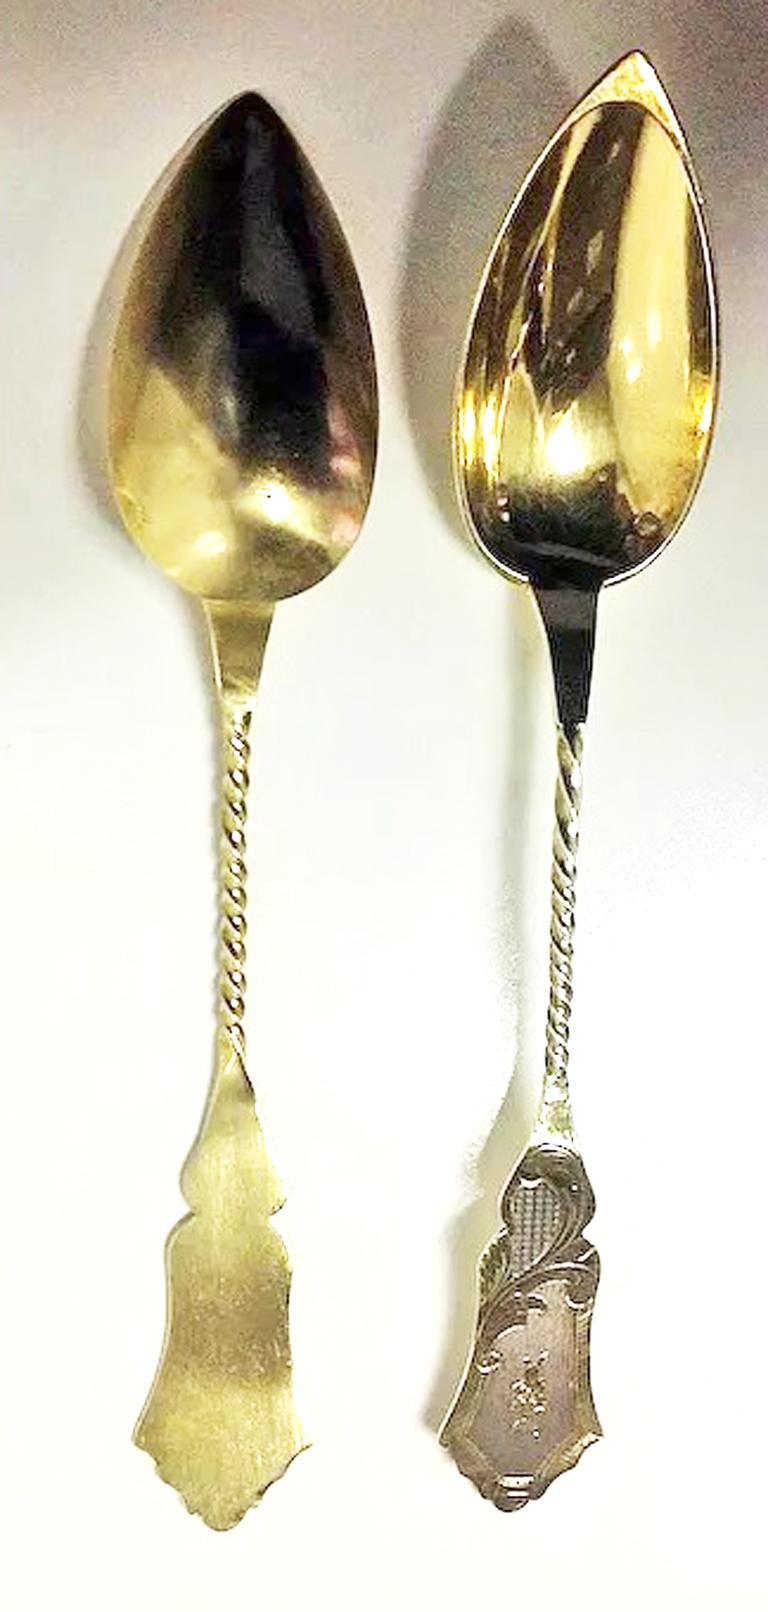 Set of 4 French Silver with vermeil Spoons, Paris C. 1850 by Phillipe Berthier 1